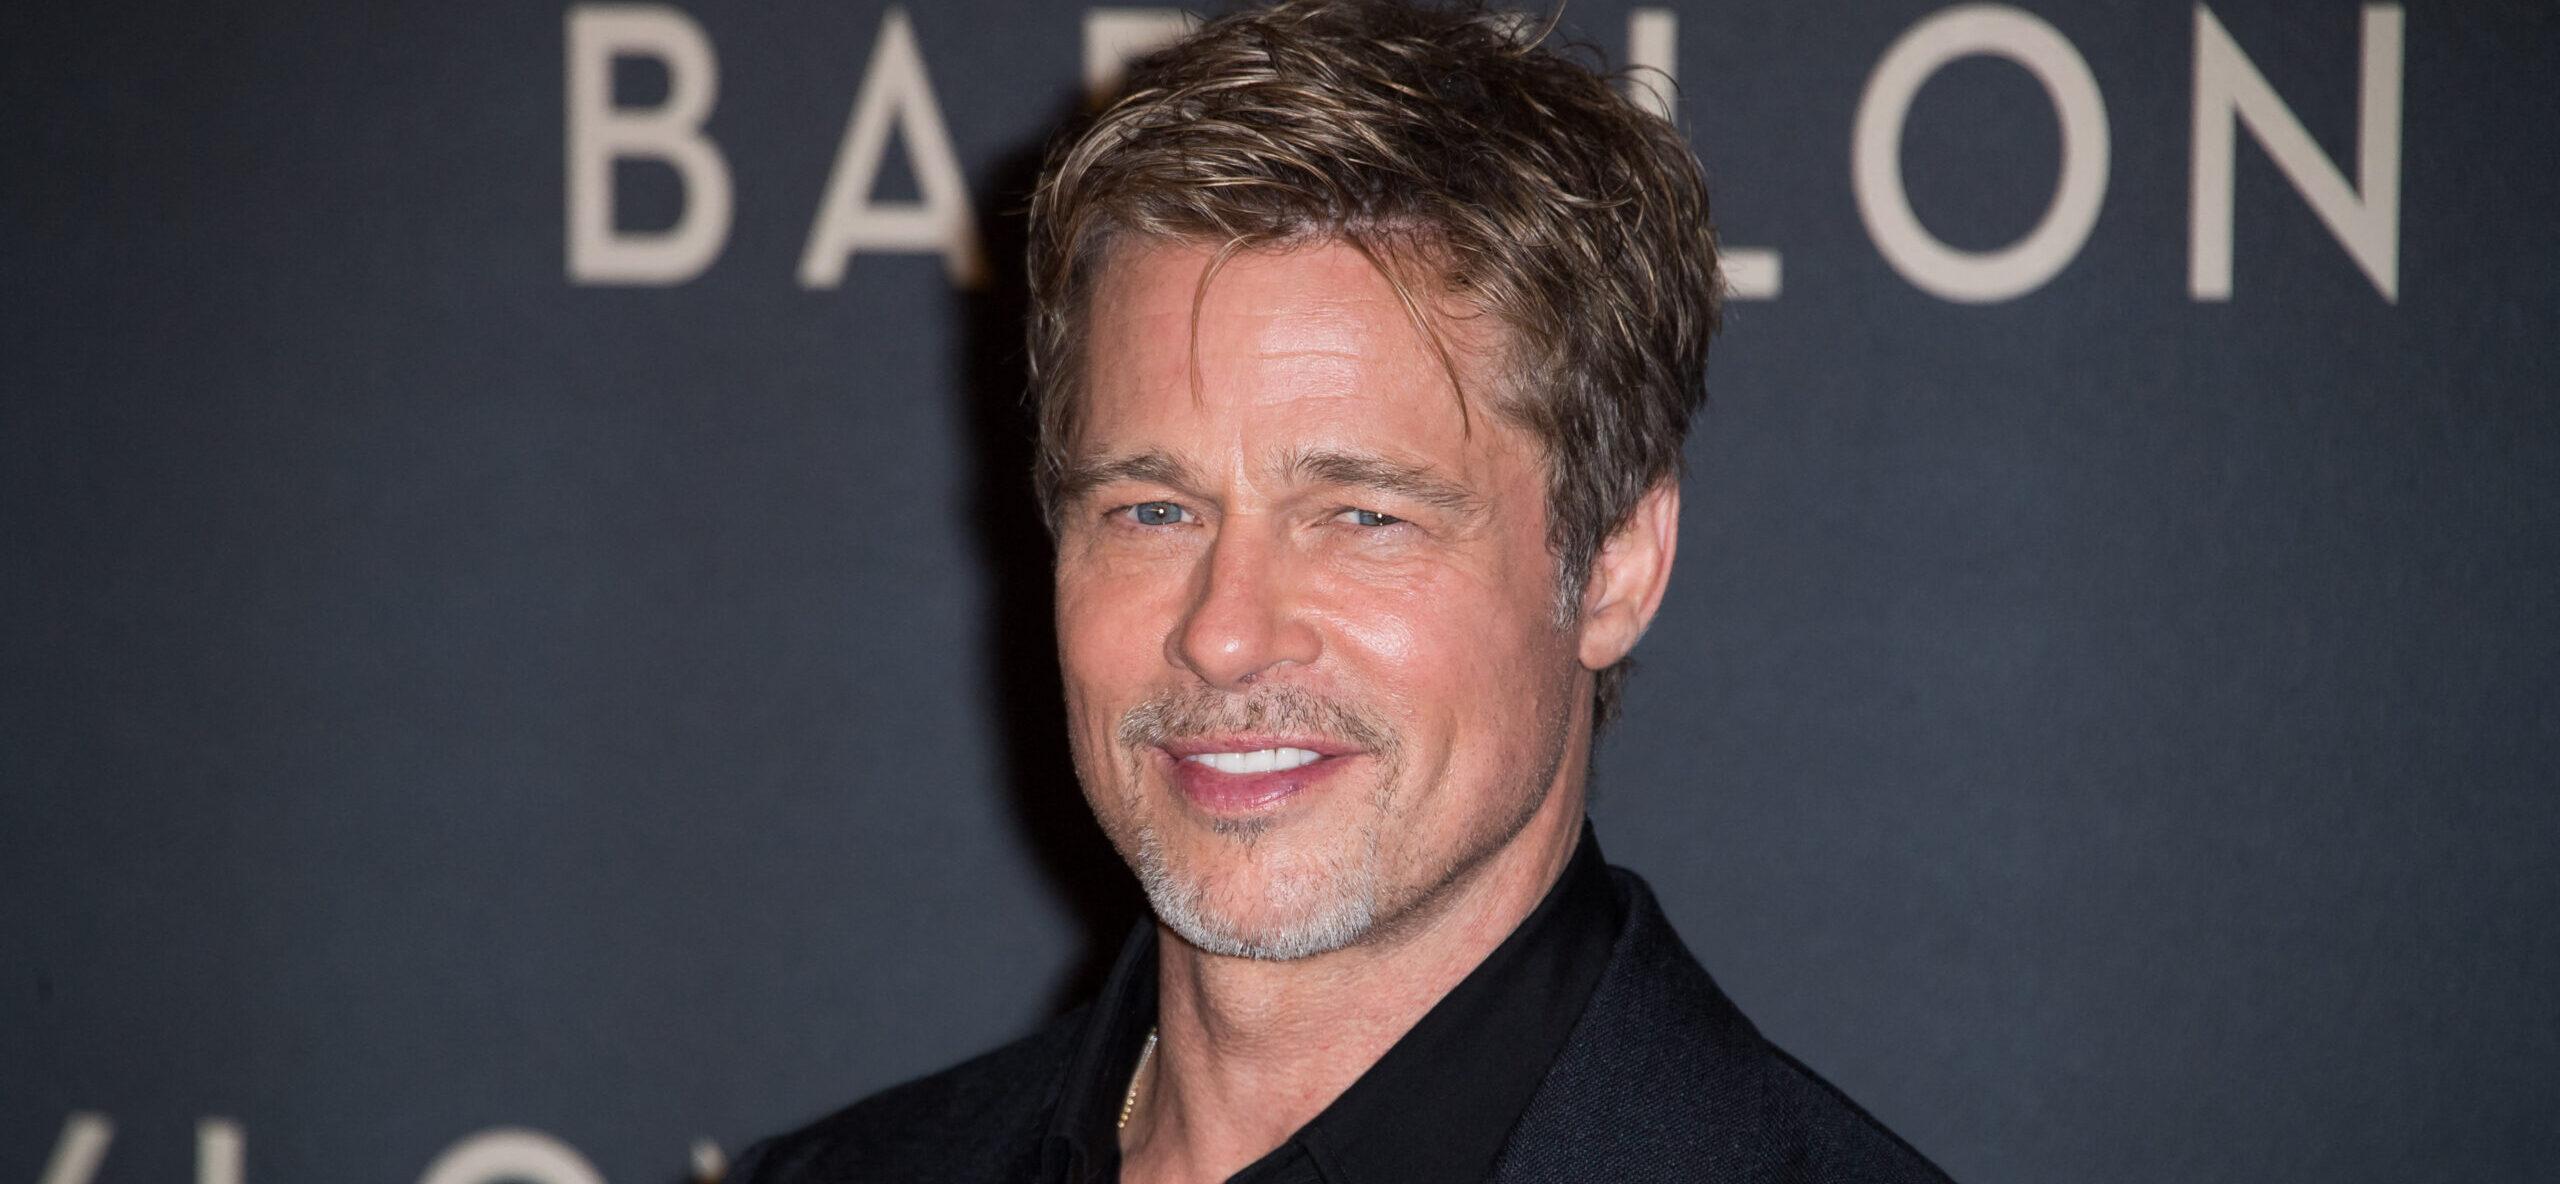 Brad Pitt looks youthful during commerical shoot in France